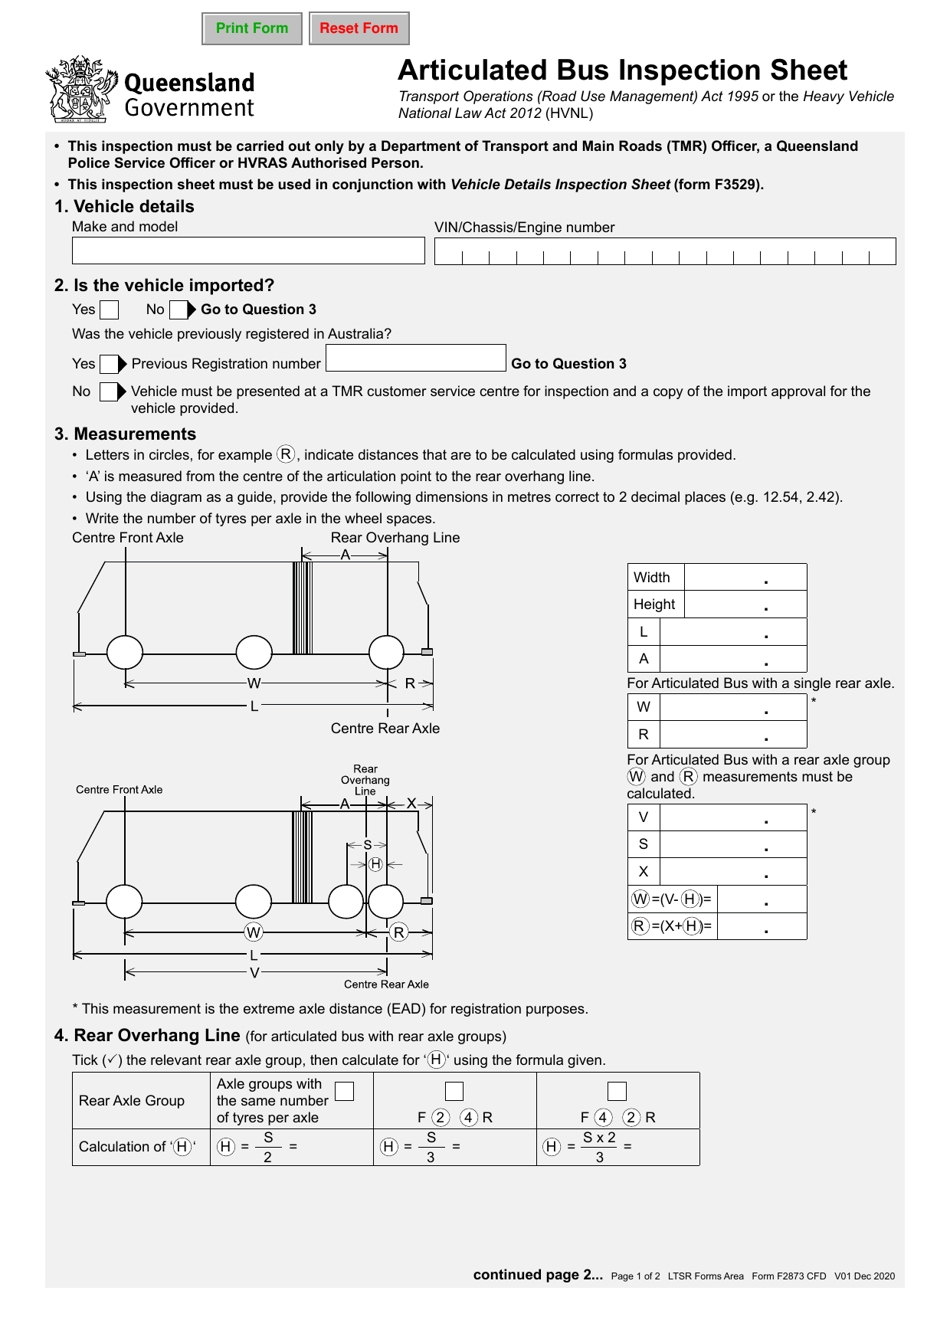 Form F2873 Articulated Bus Inspection Sheet - Queensland, Australia, Page 1